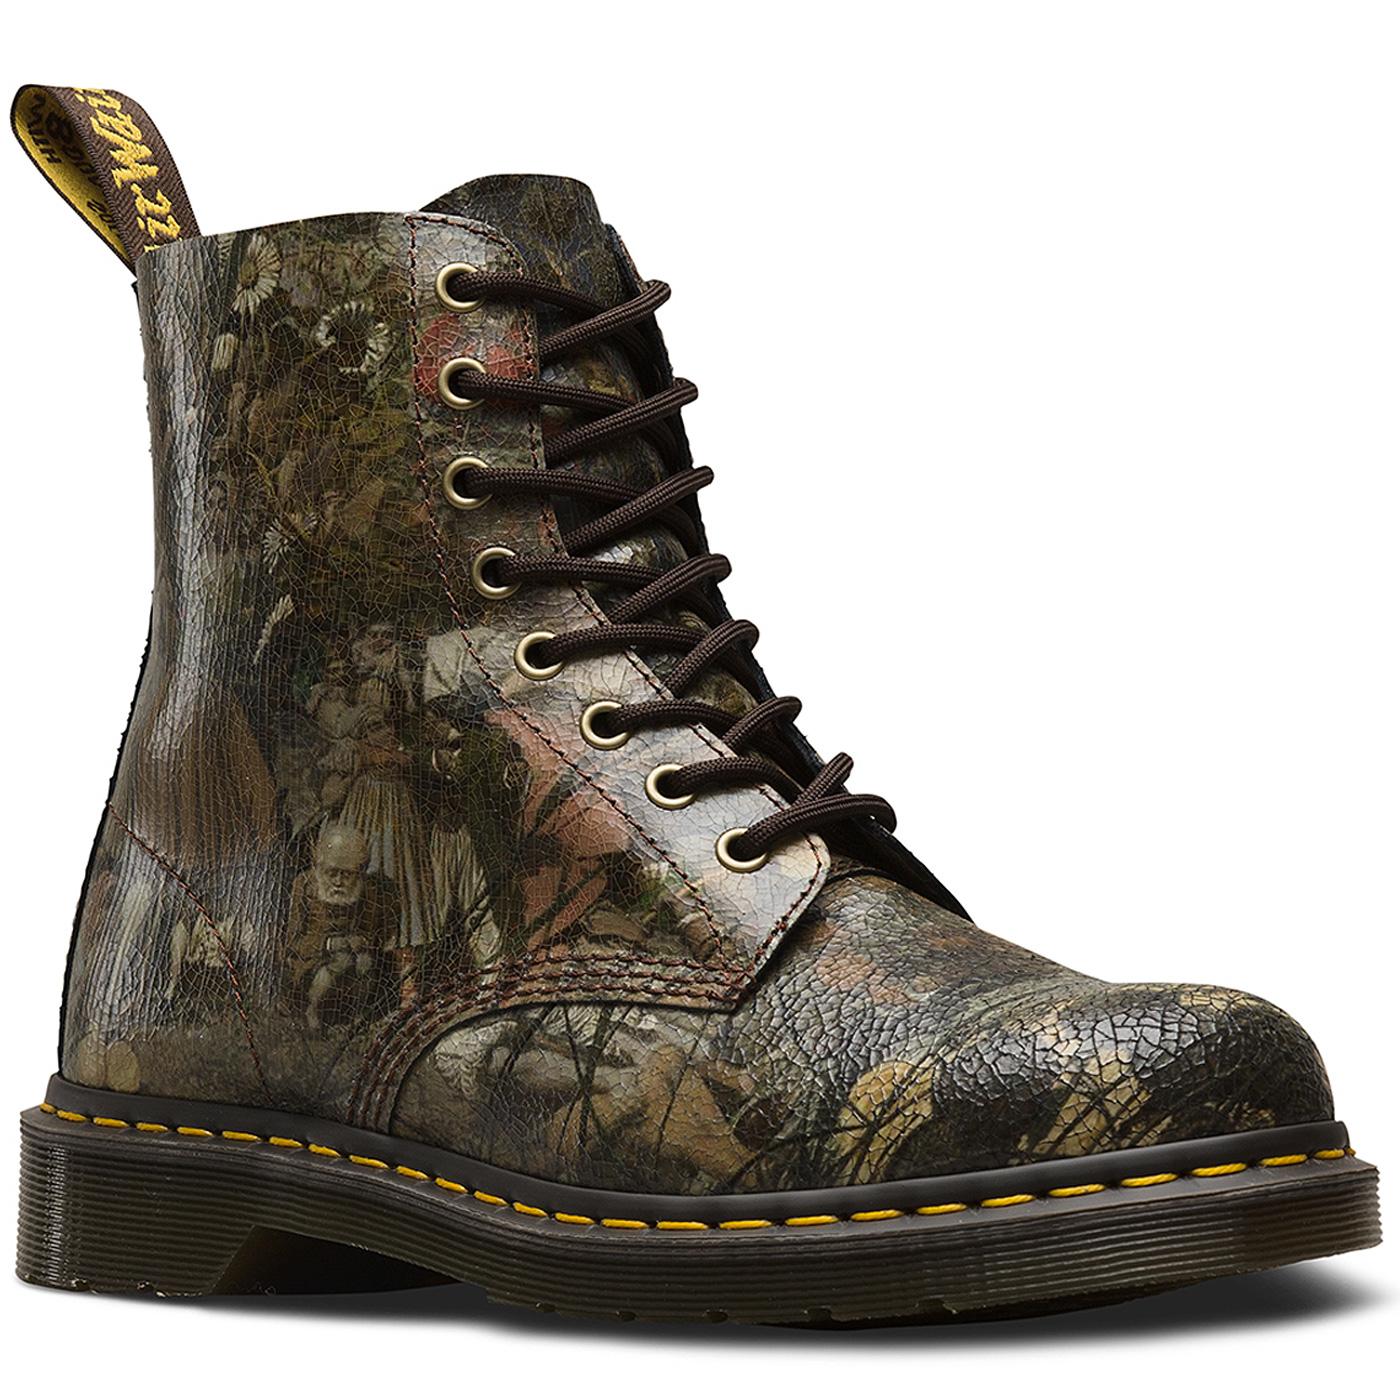 1460 Pascal DR MARTENS Dadd Cristal Suede Boots